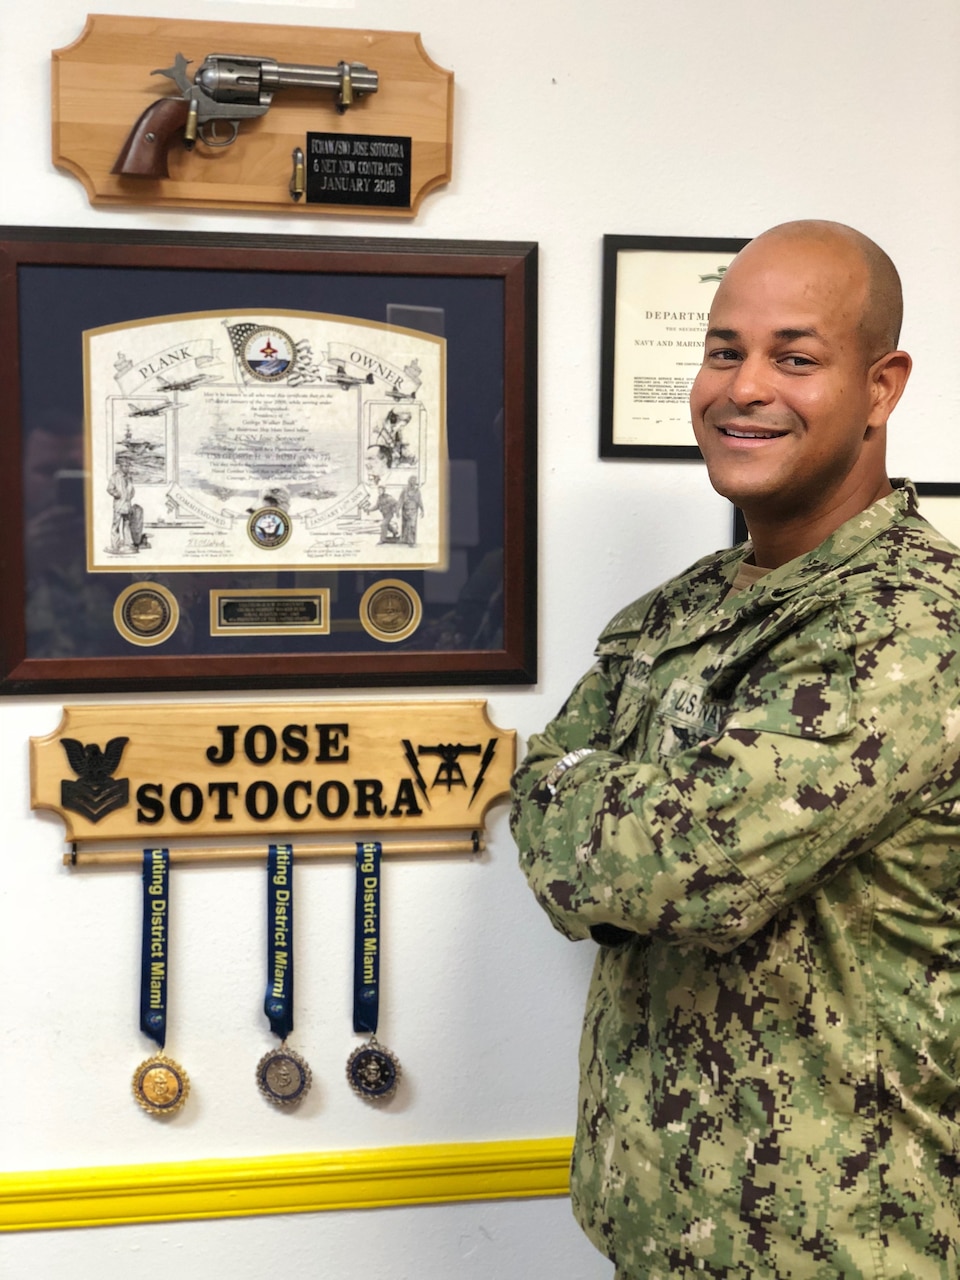 Navy Petty Officer 1st Class Jose Sotocora poses for a photo at a Navy Recruiting District Miami recruiting office in Brandon, Fla., July 18, 2018. Sotocora is recognized as one of the Navy’s outstanding recruiters. Navy photo by Petty Officer 2nd Class Latrice Ames